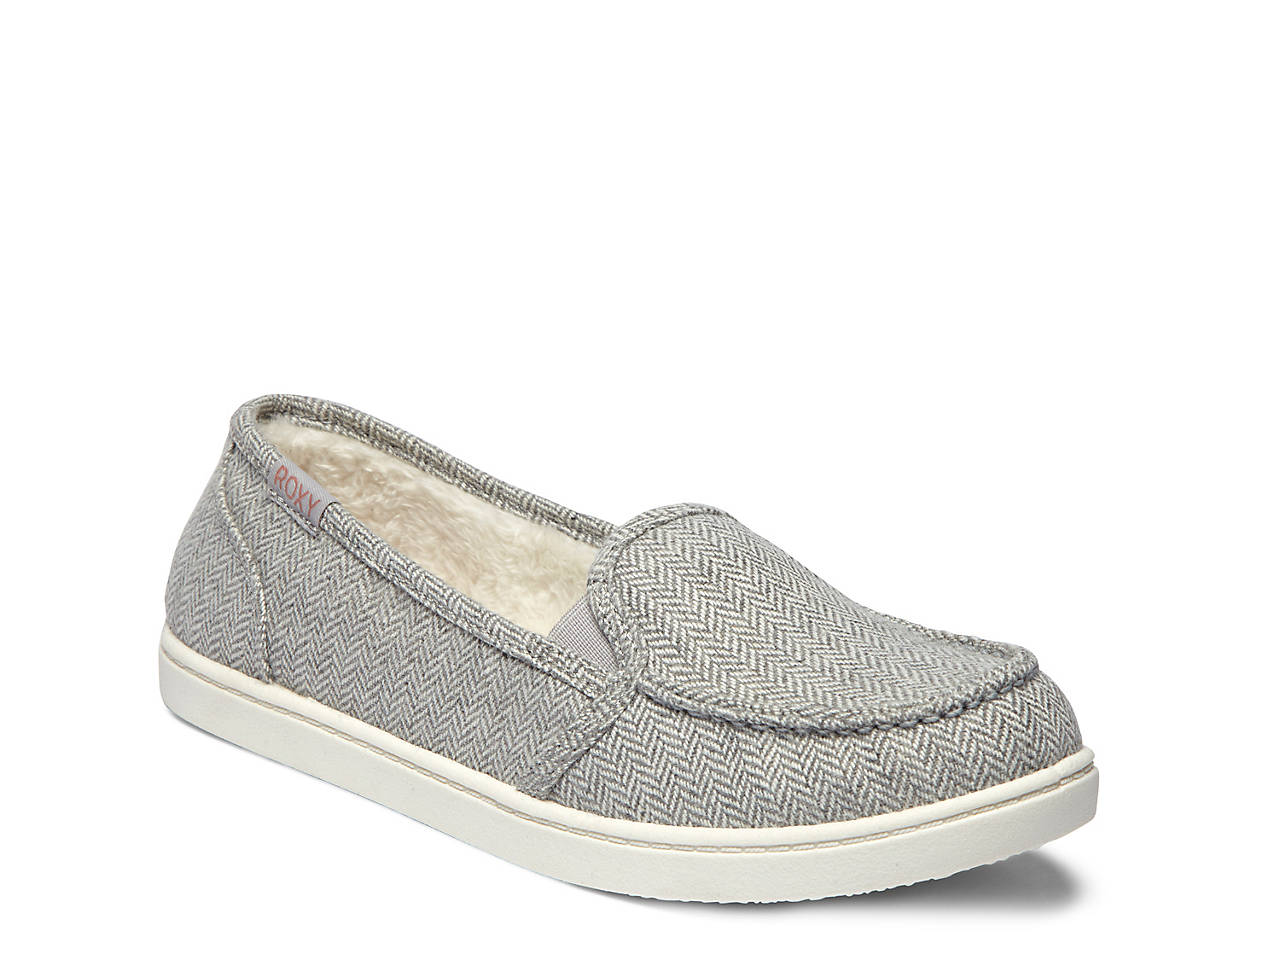 Roxy Minnow Quilted Sport Flat Women's Shoes | DSW